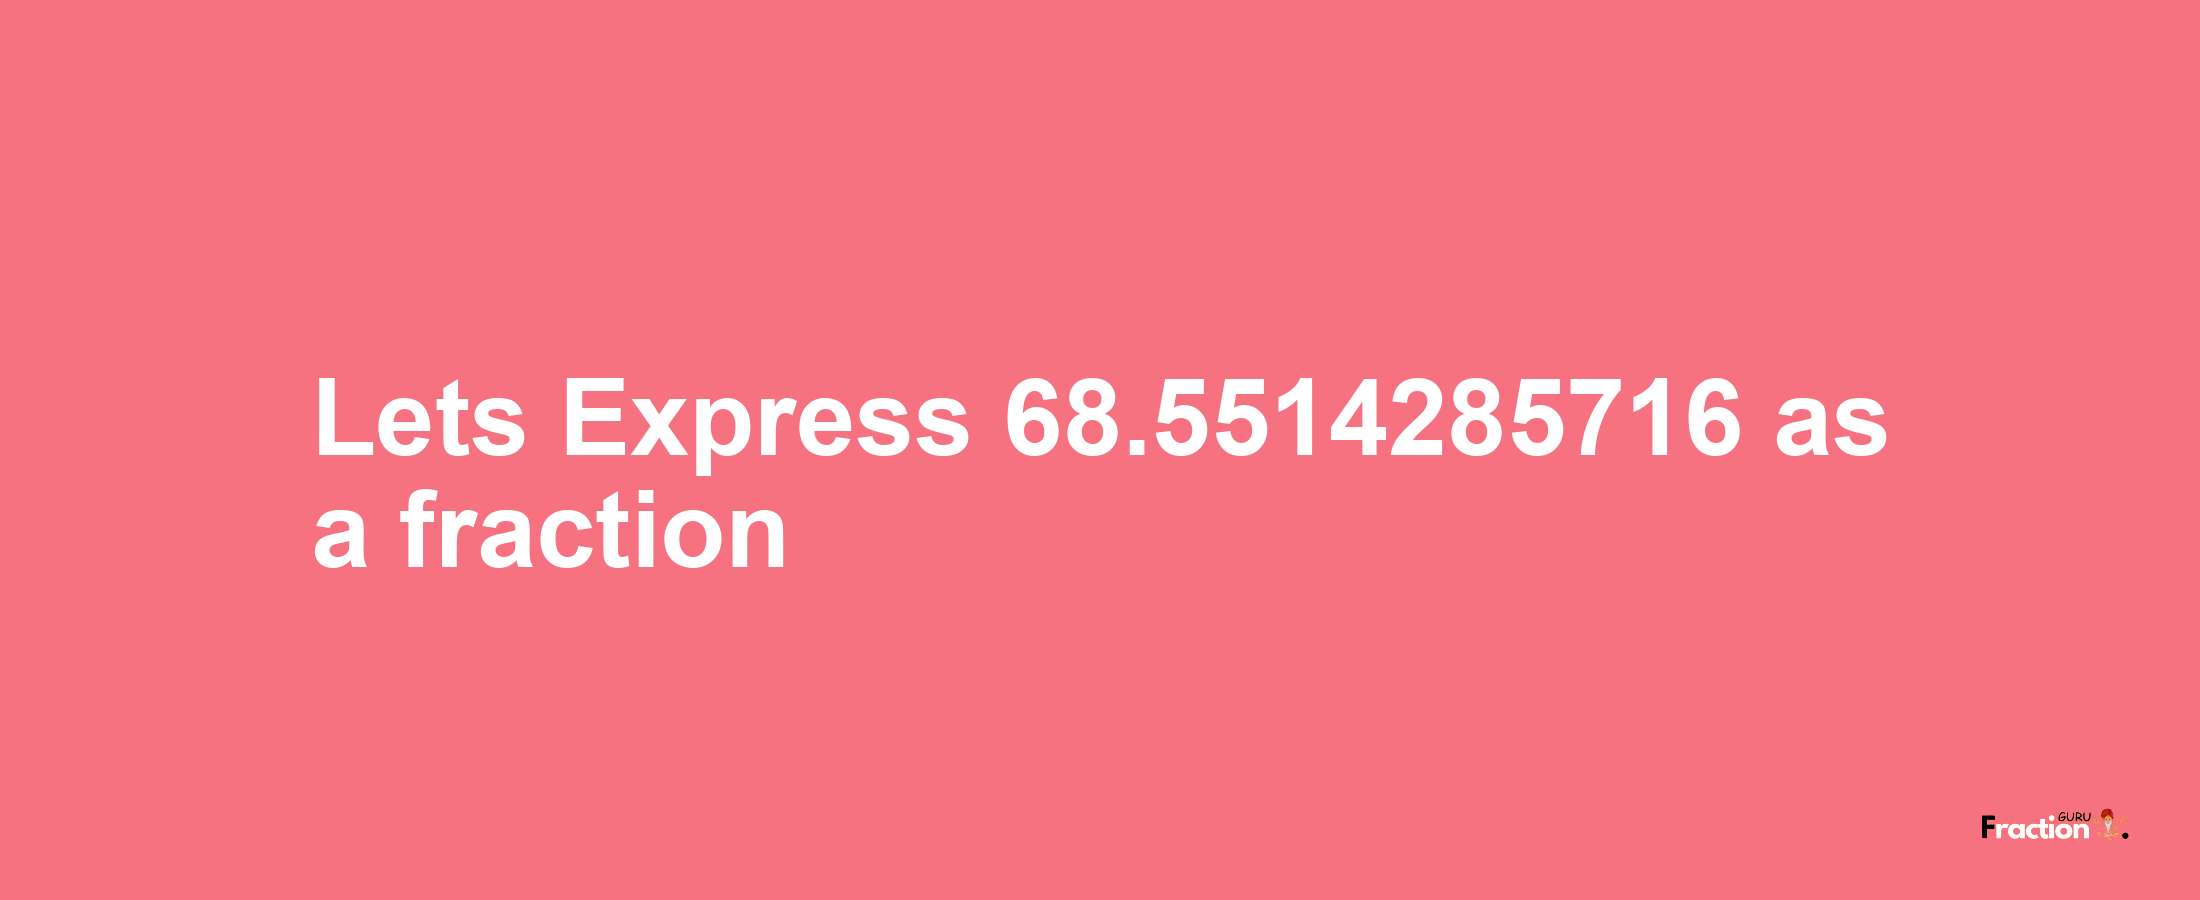 Lets Express 68.5514285716 as afraction